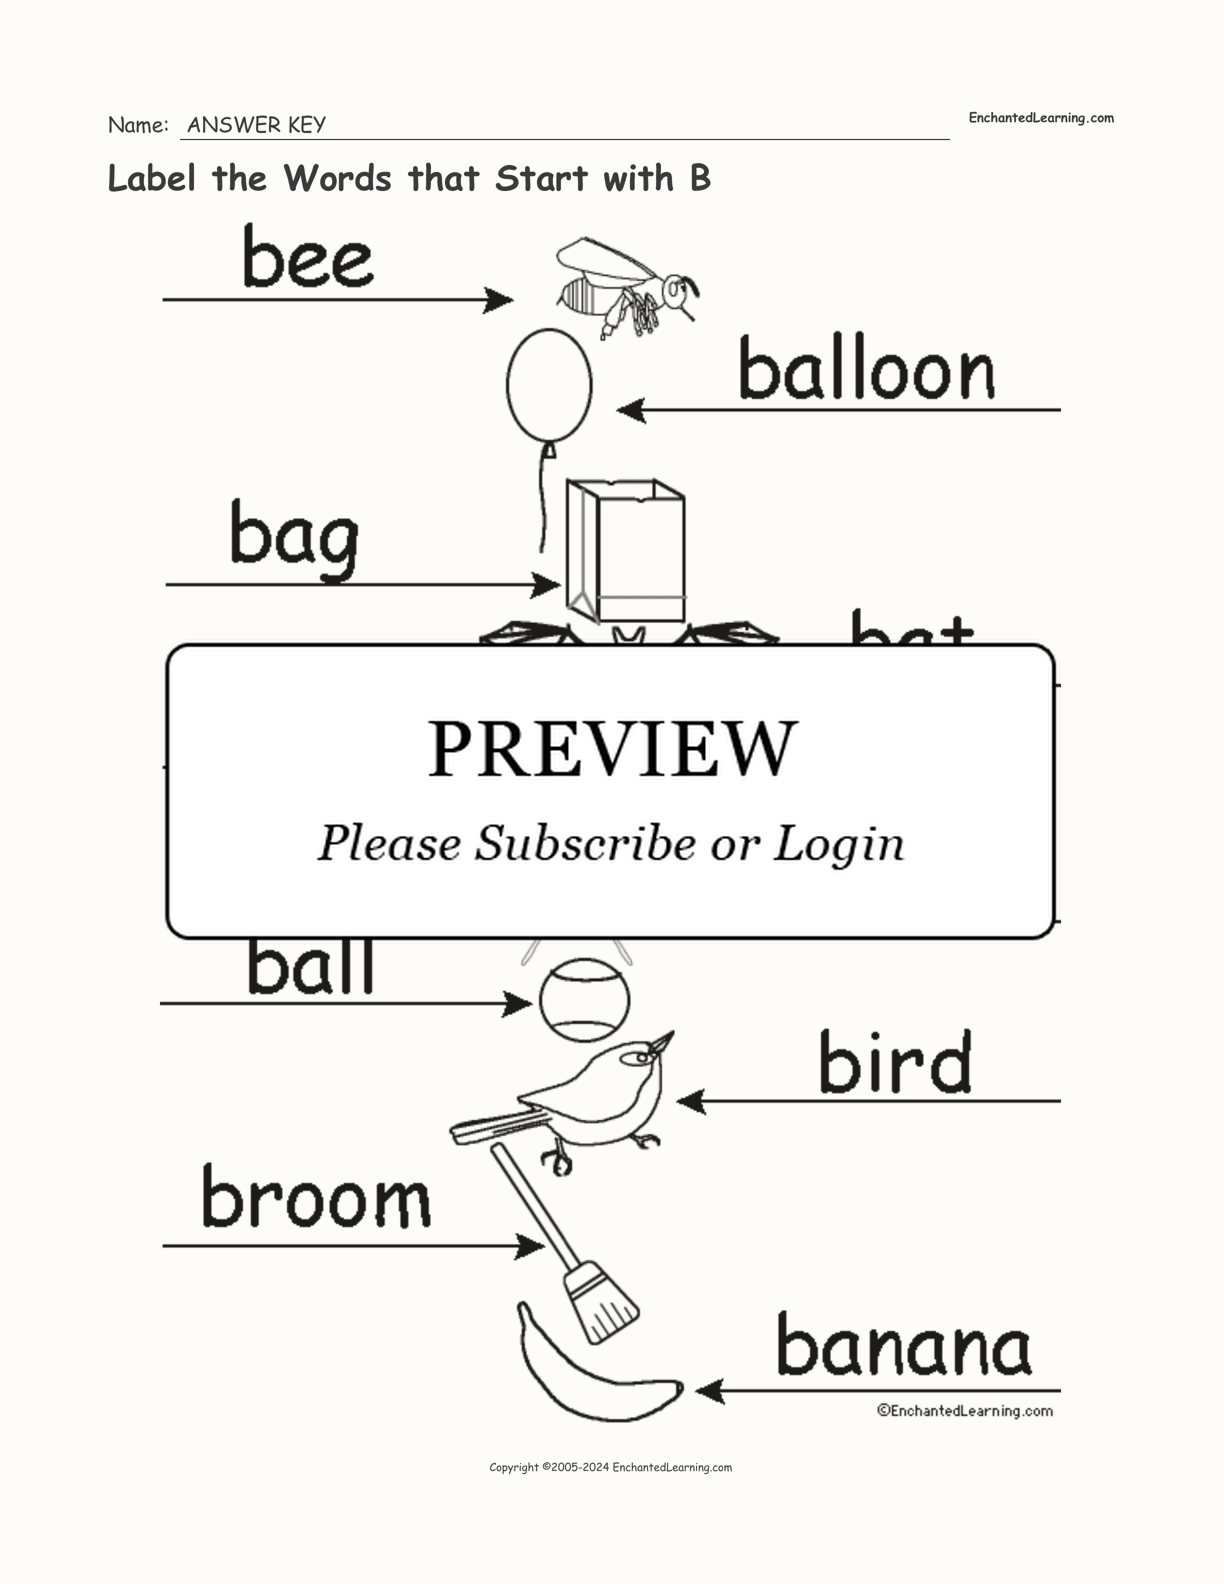 Label the Words that Start with B interactive worksheet page 2